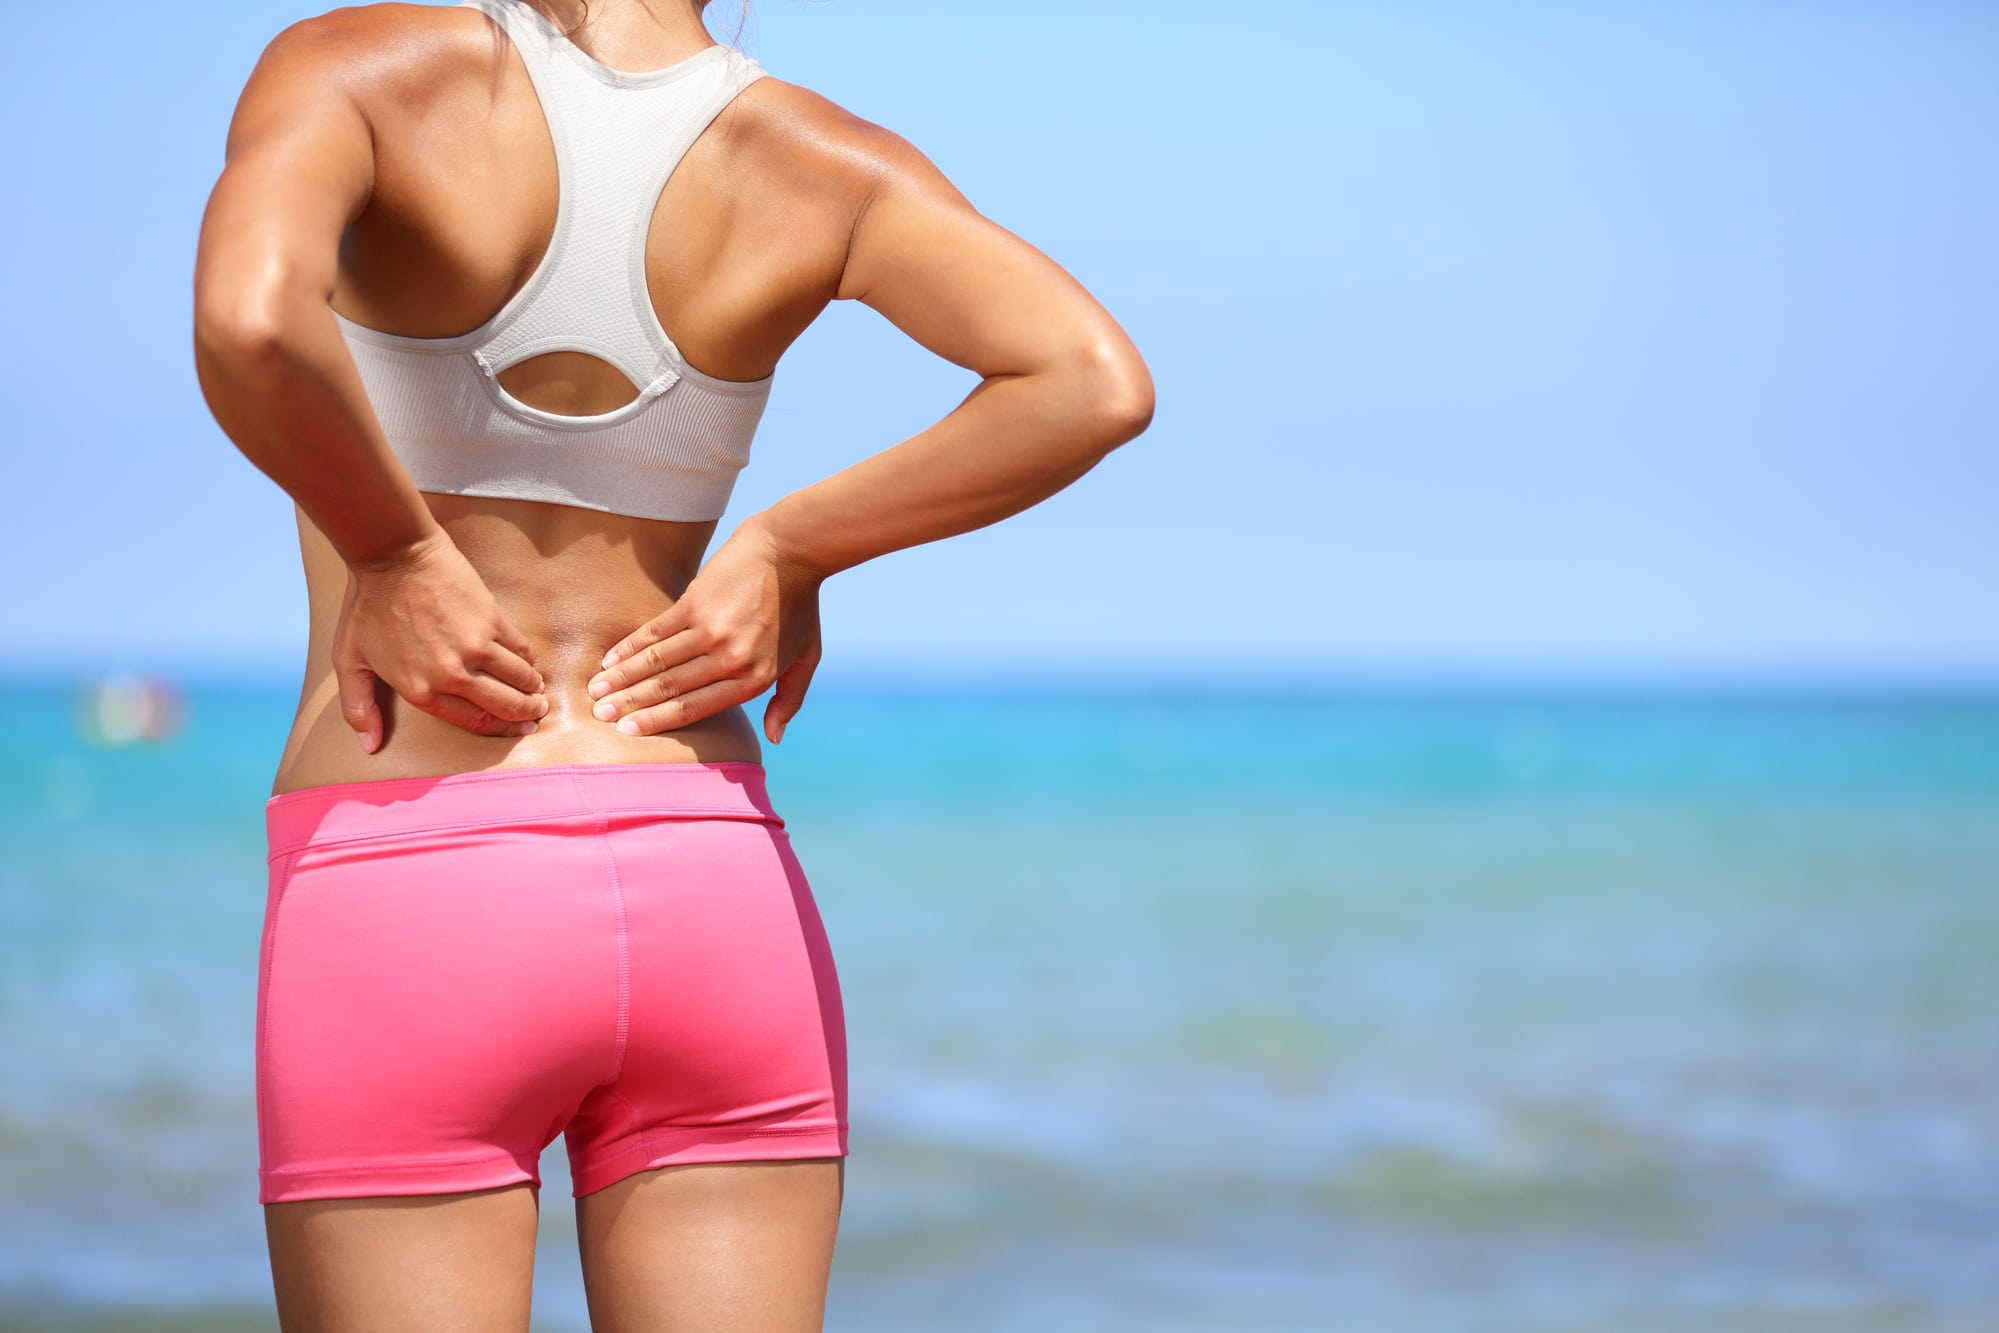 Tips For Alleviating Back Pain